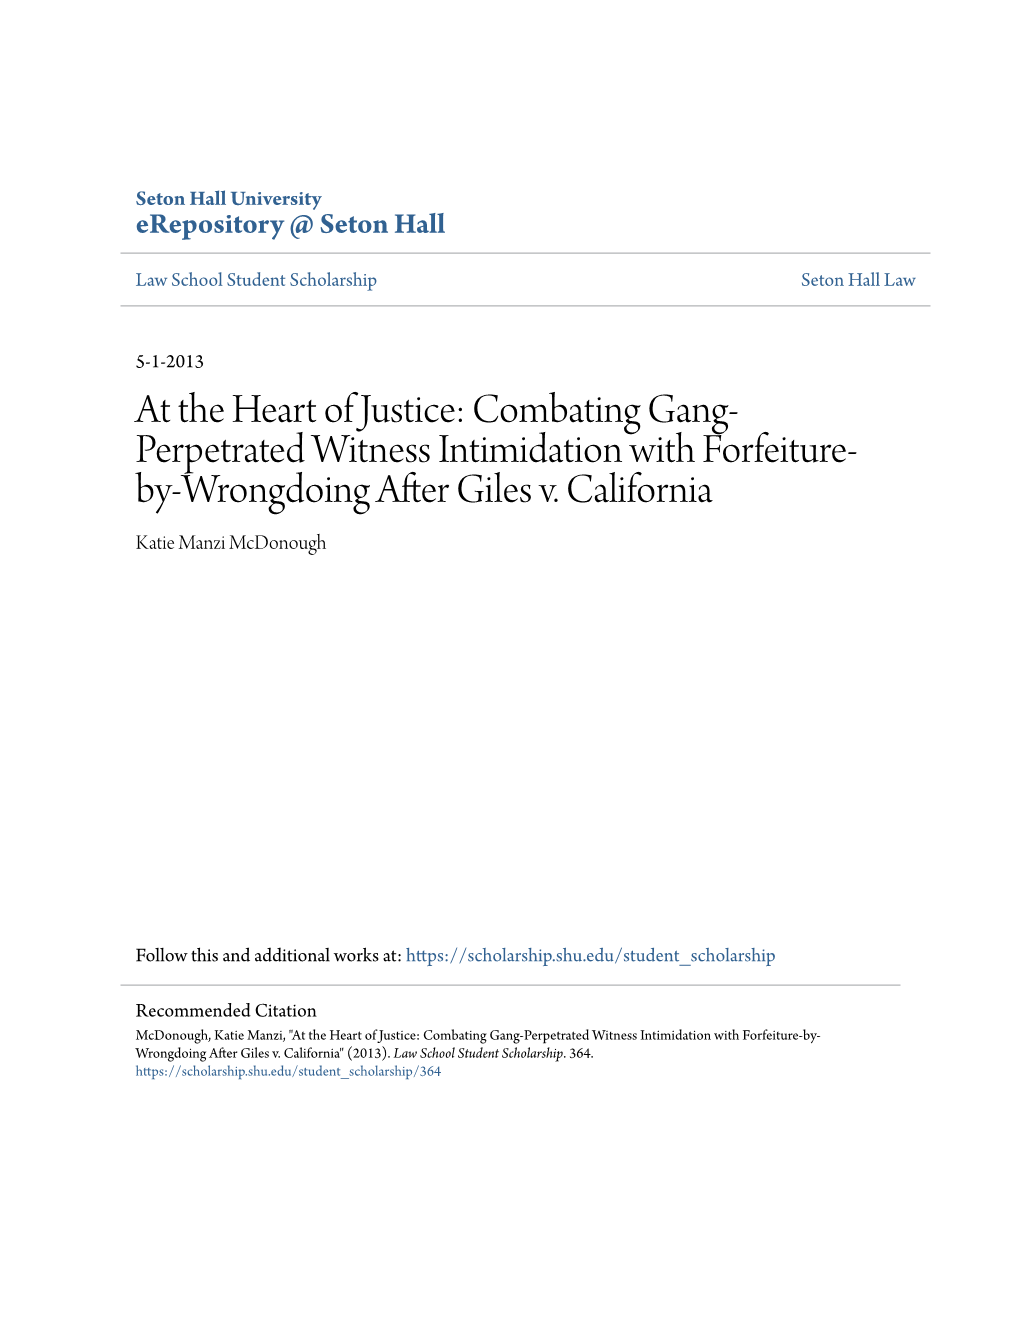 Combating Gang-Perpetrated Witness Intimidation with Forfeiture-By- Wrongdoing After Giles V